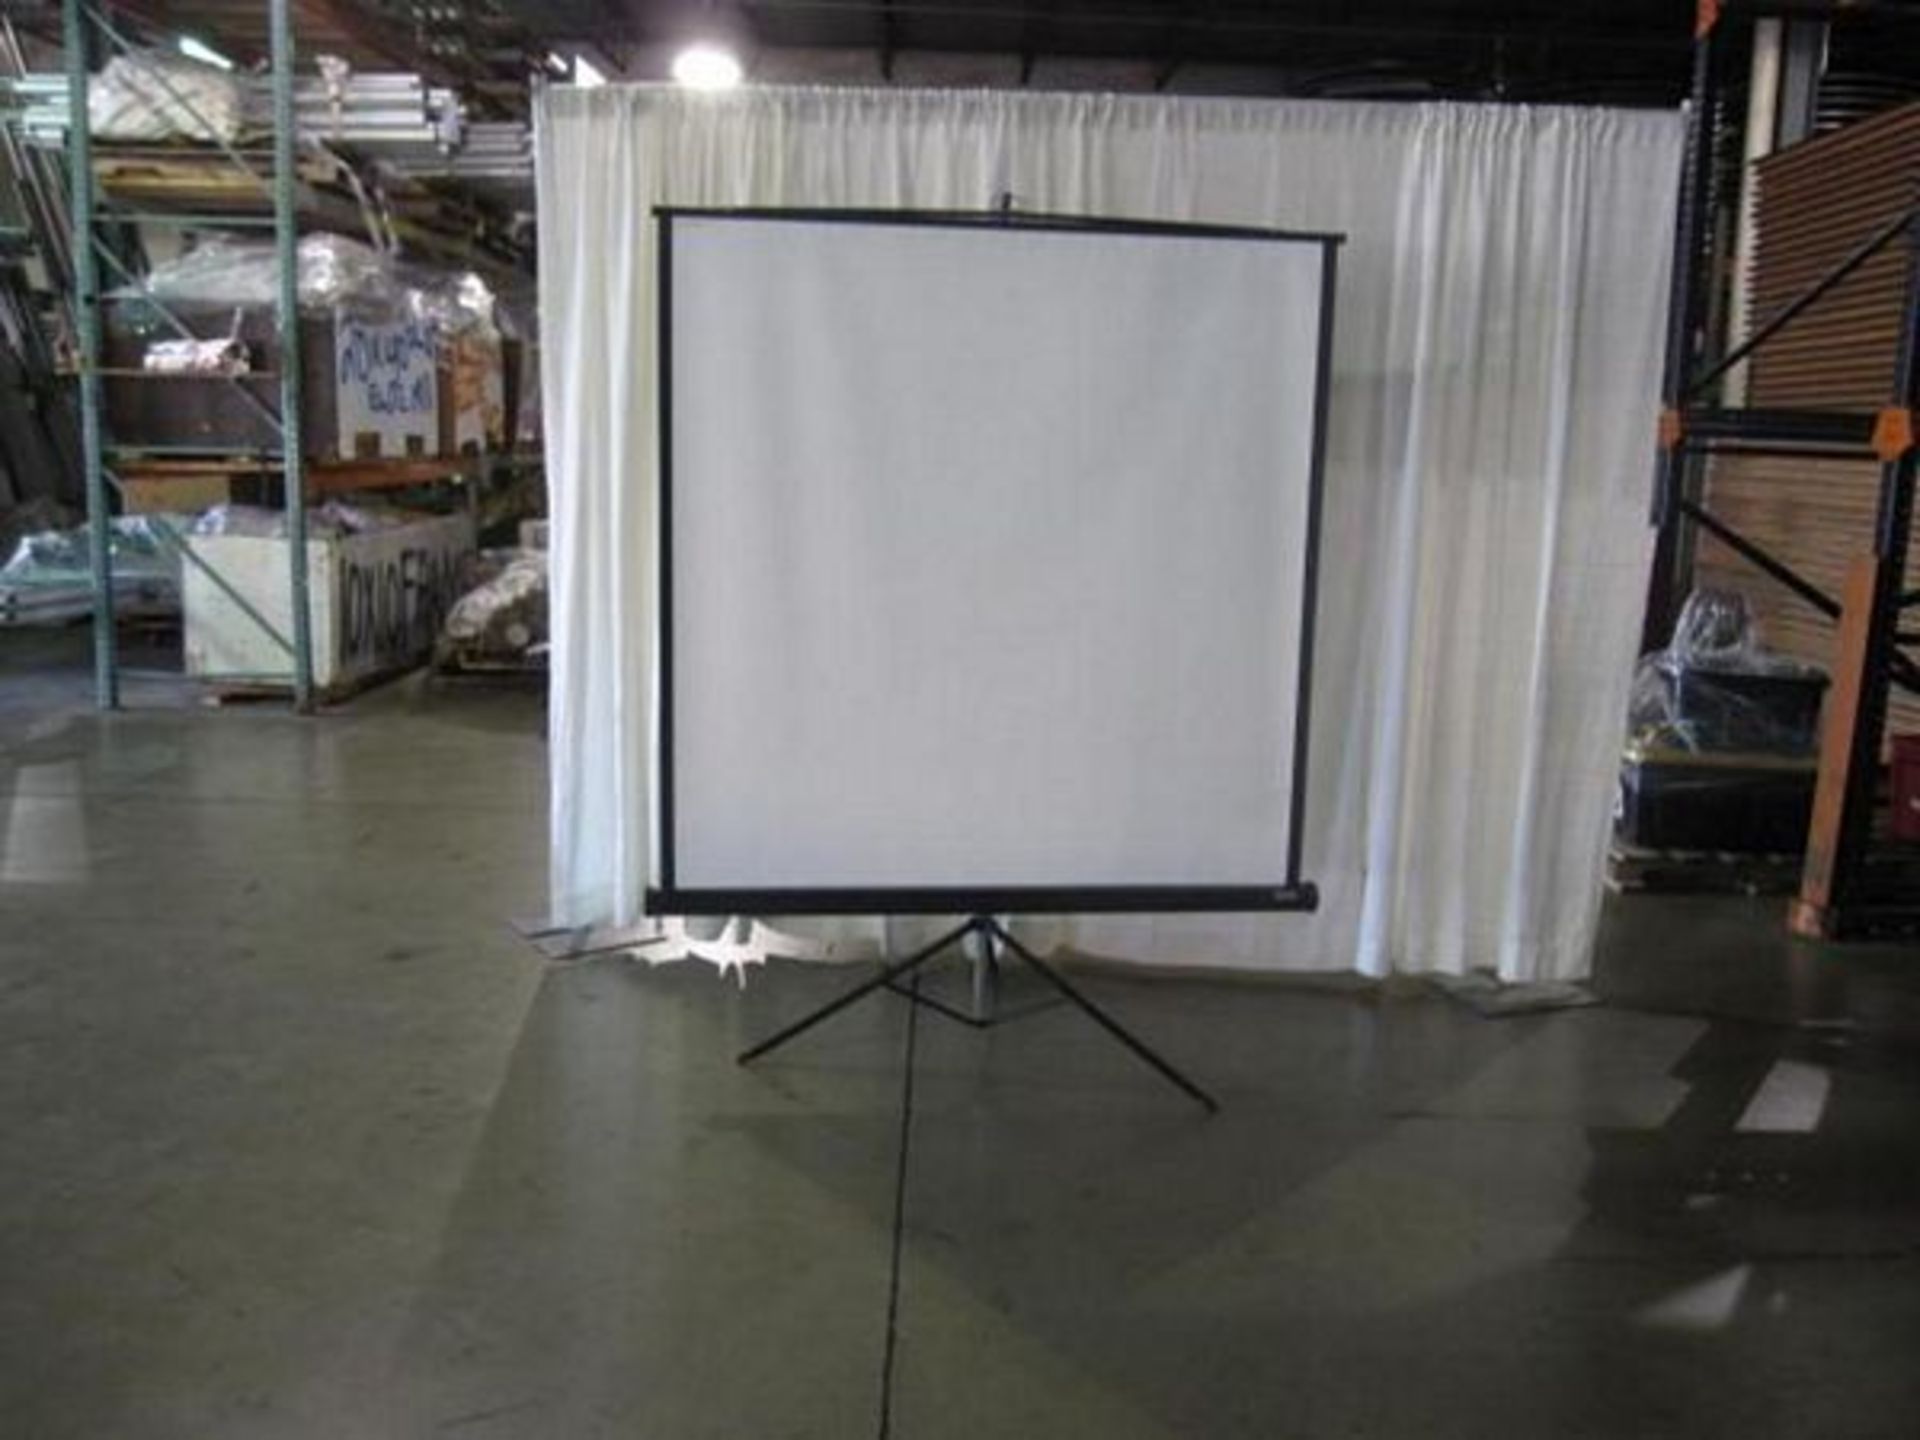 60 in. x 60 in. Projector Screen - Image 2 of 2